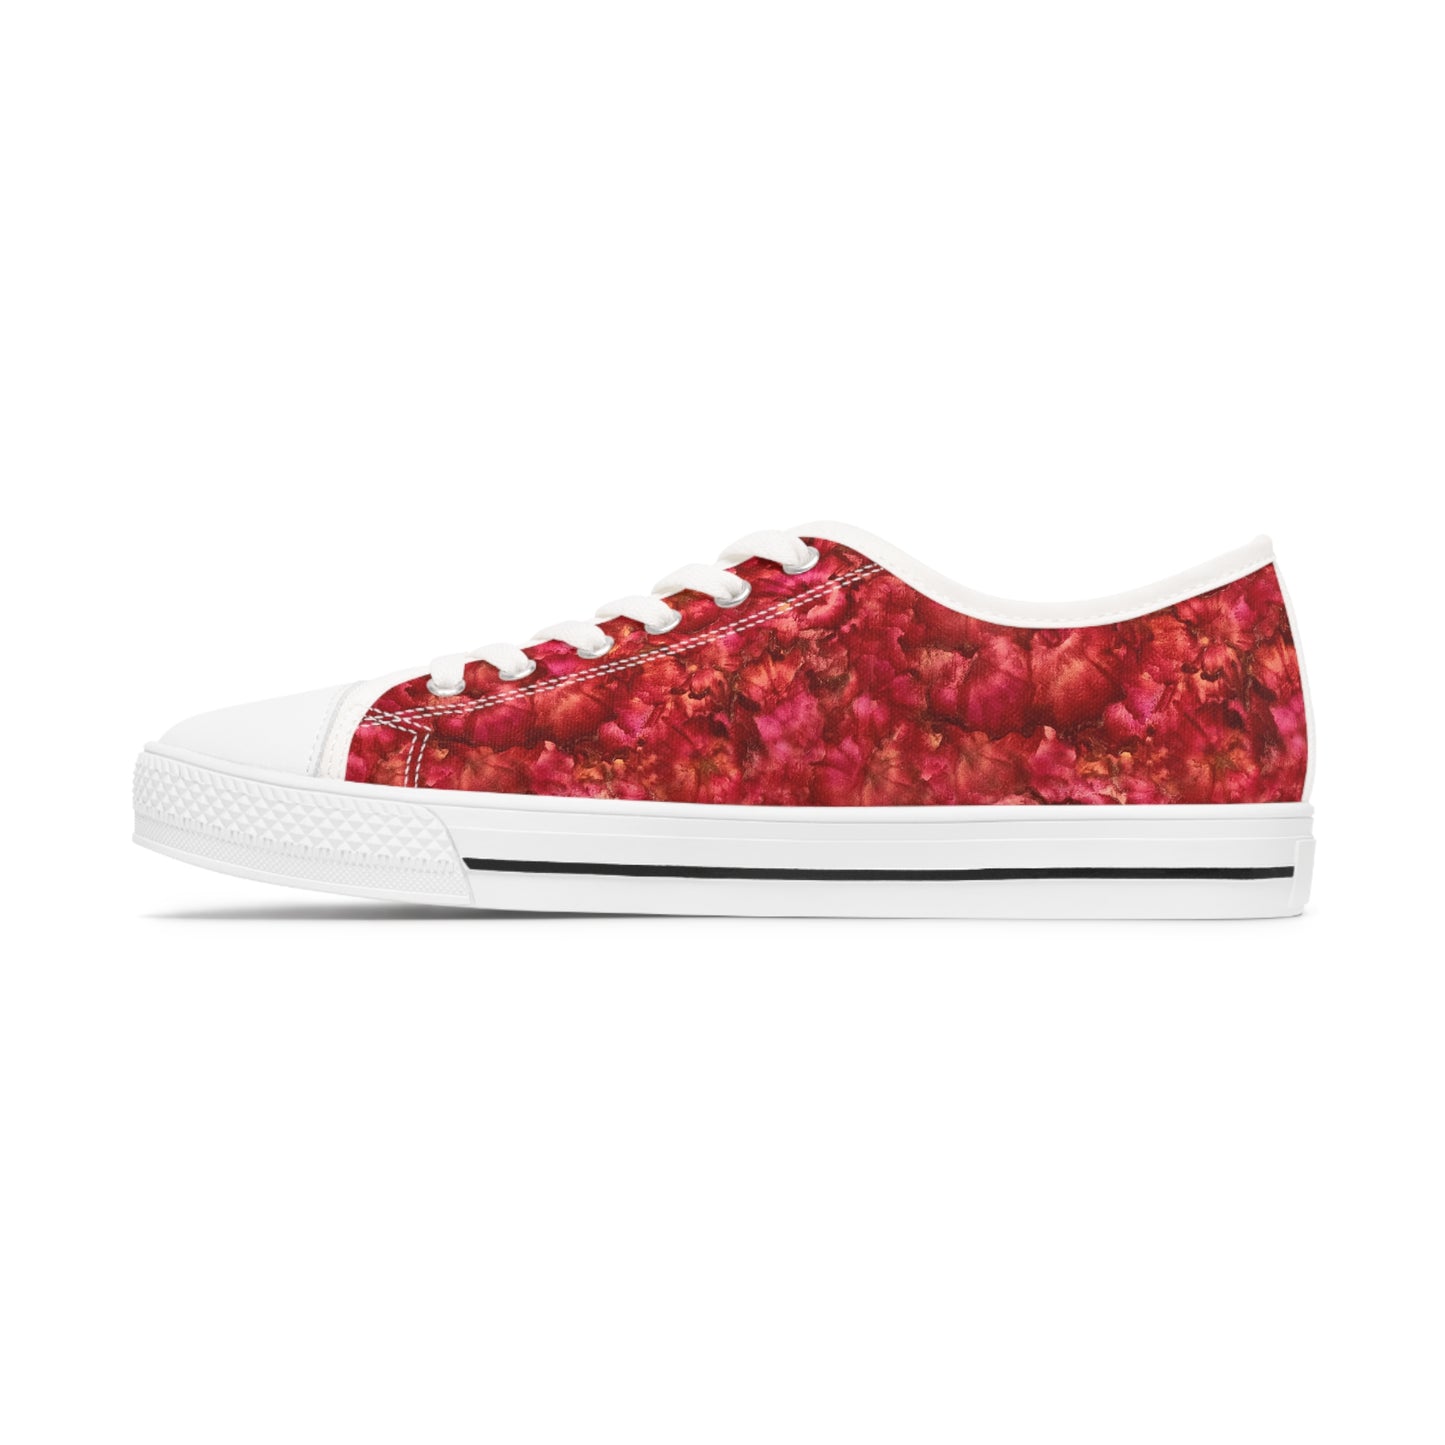 Amore Women's Low-Top Fashion Sneakers